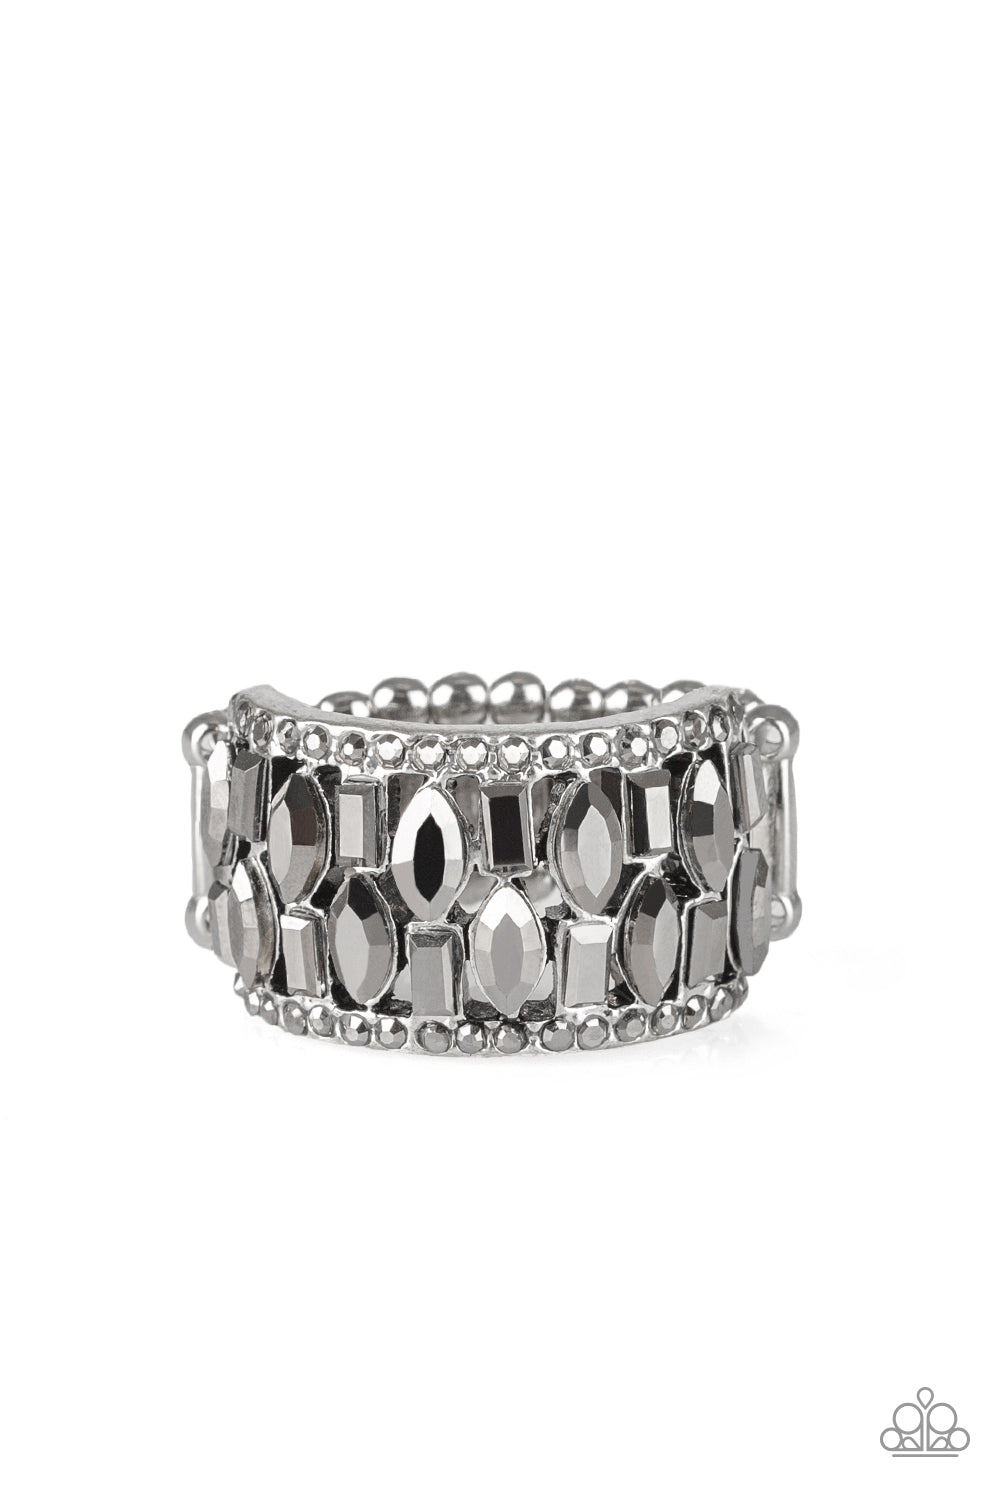 Featuring round, emerald, and marquise style cuts, glittery hematite rhinestones stack across the finger for a glamorous shimmer. Features a stretchy band for a flexible fit.